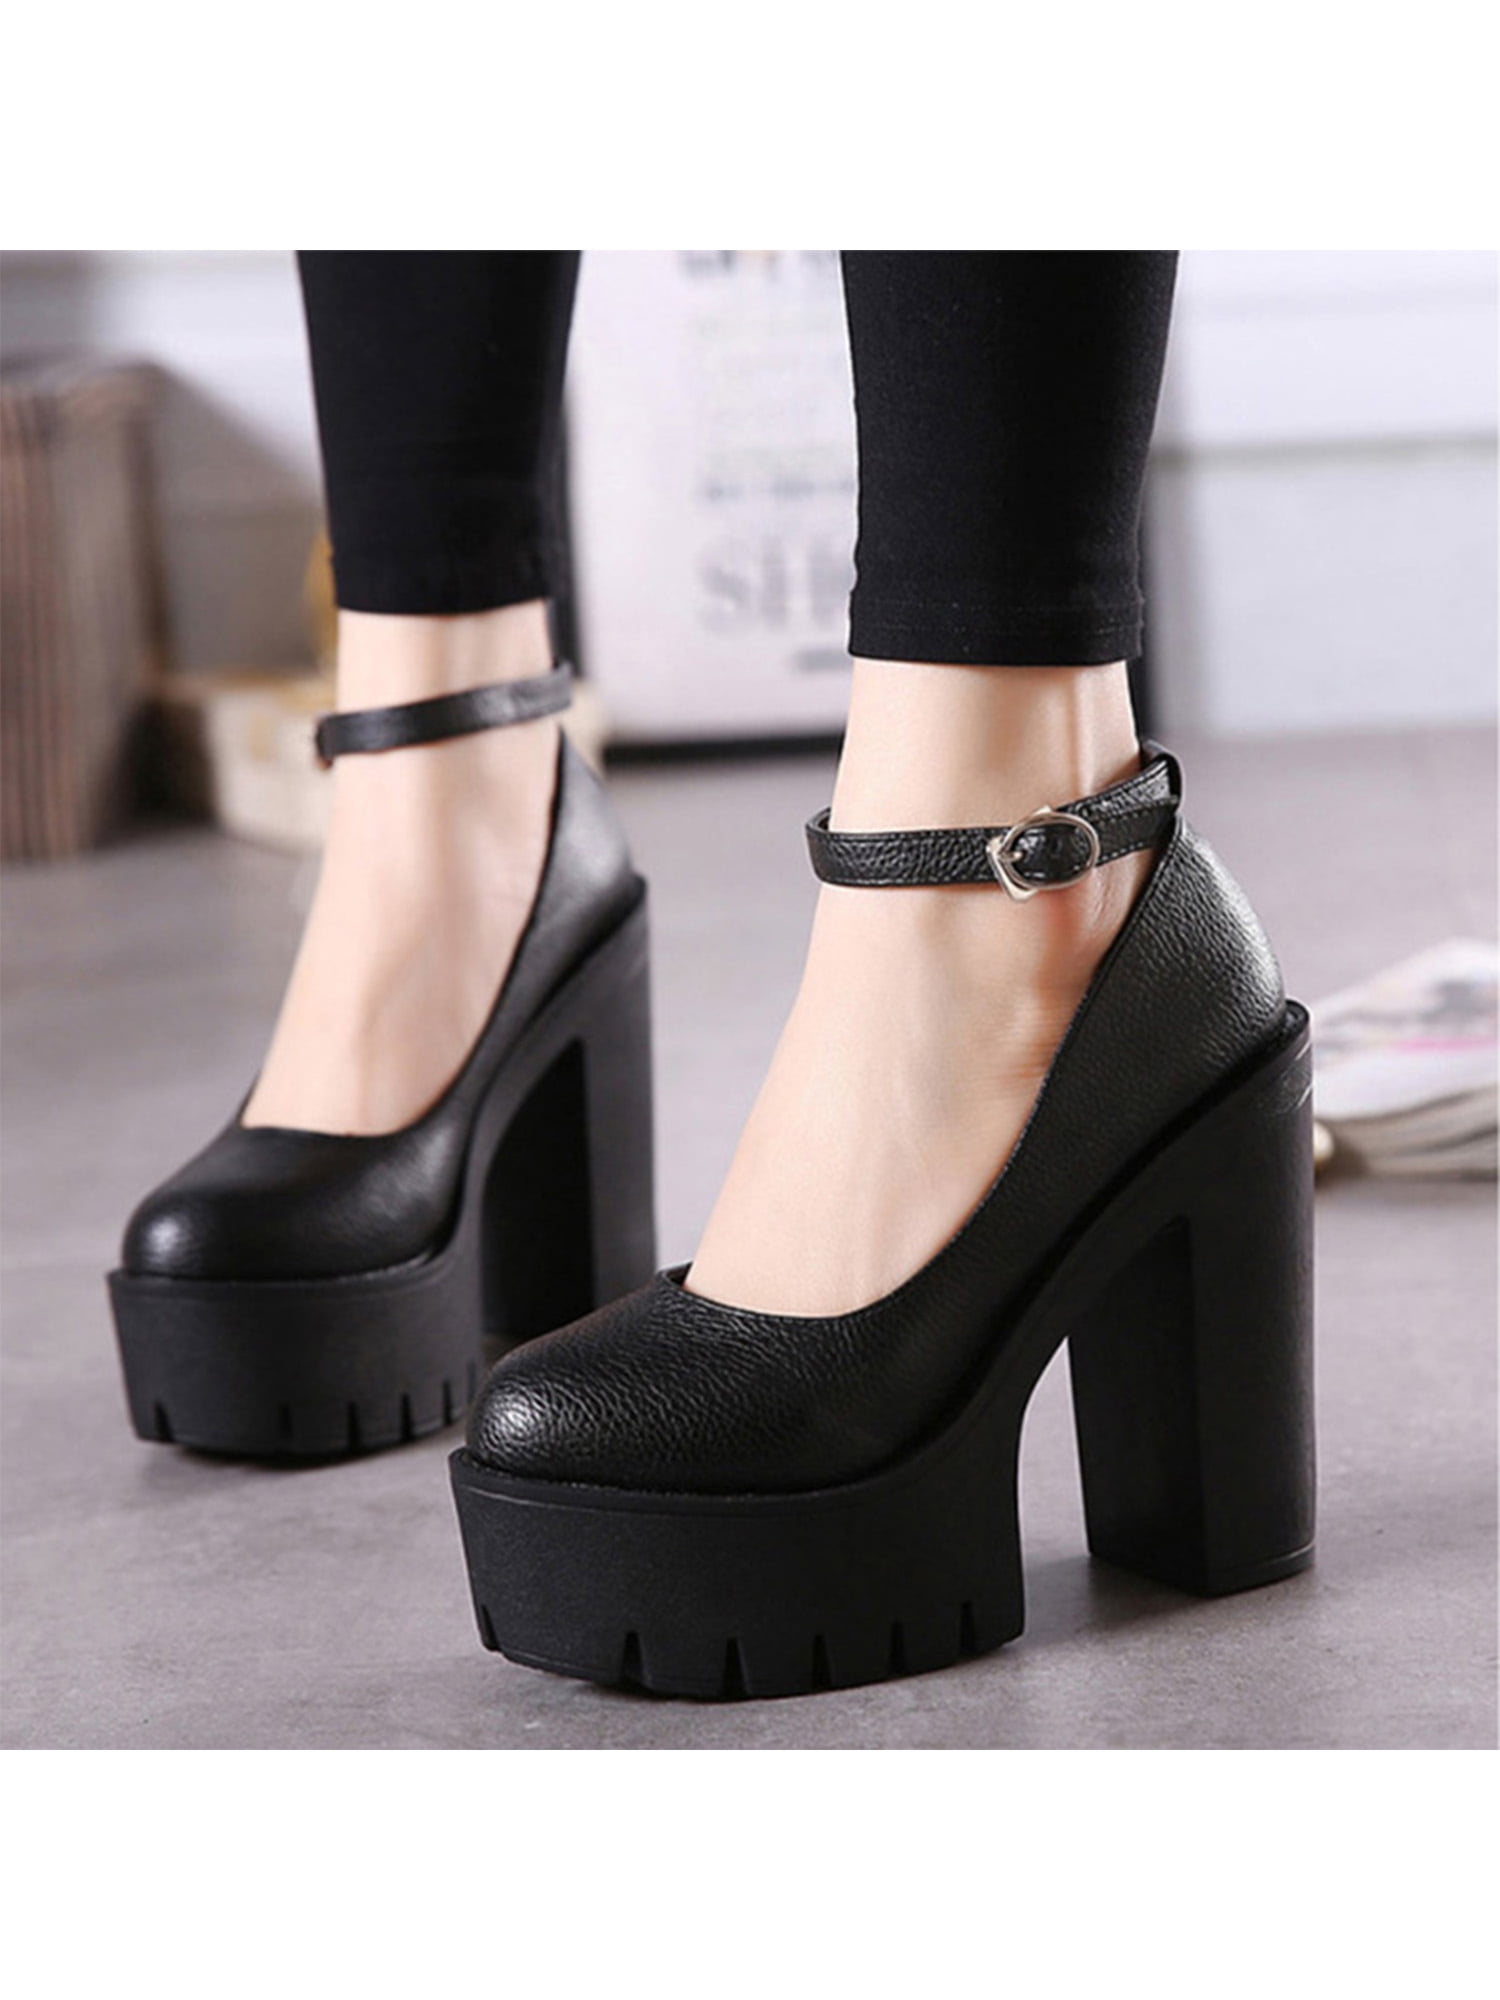 Fashion Women's High Heels Breathable Lace-up Shoes Casua Sandals Silver High  Heel Shoes for Wedding for Women Womens Size 8 Black High Heels -  Walmart.com